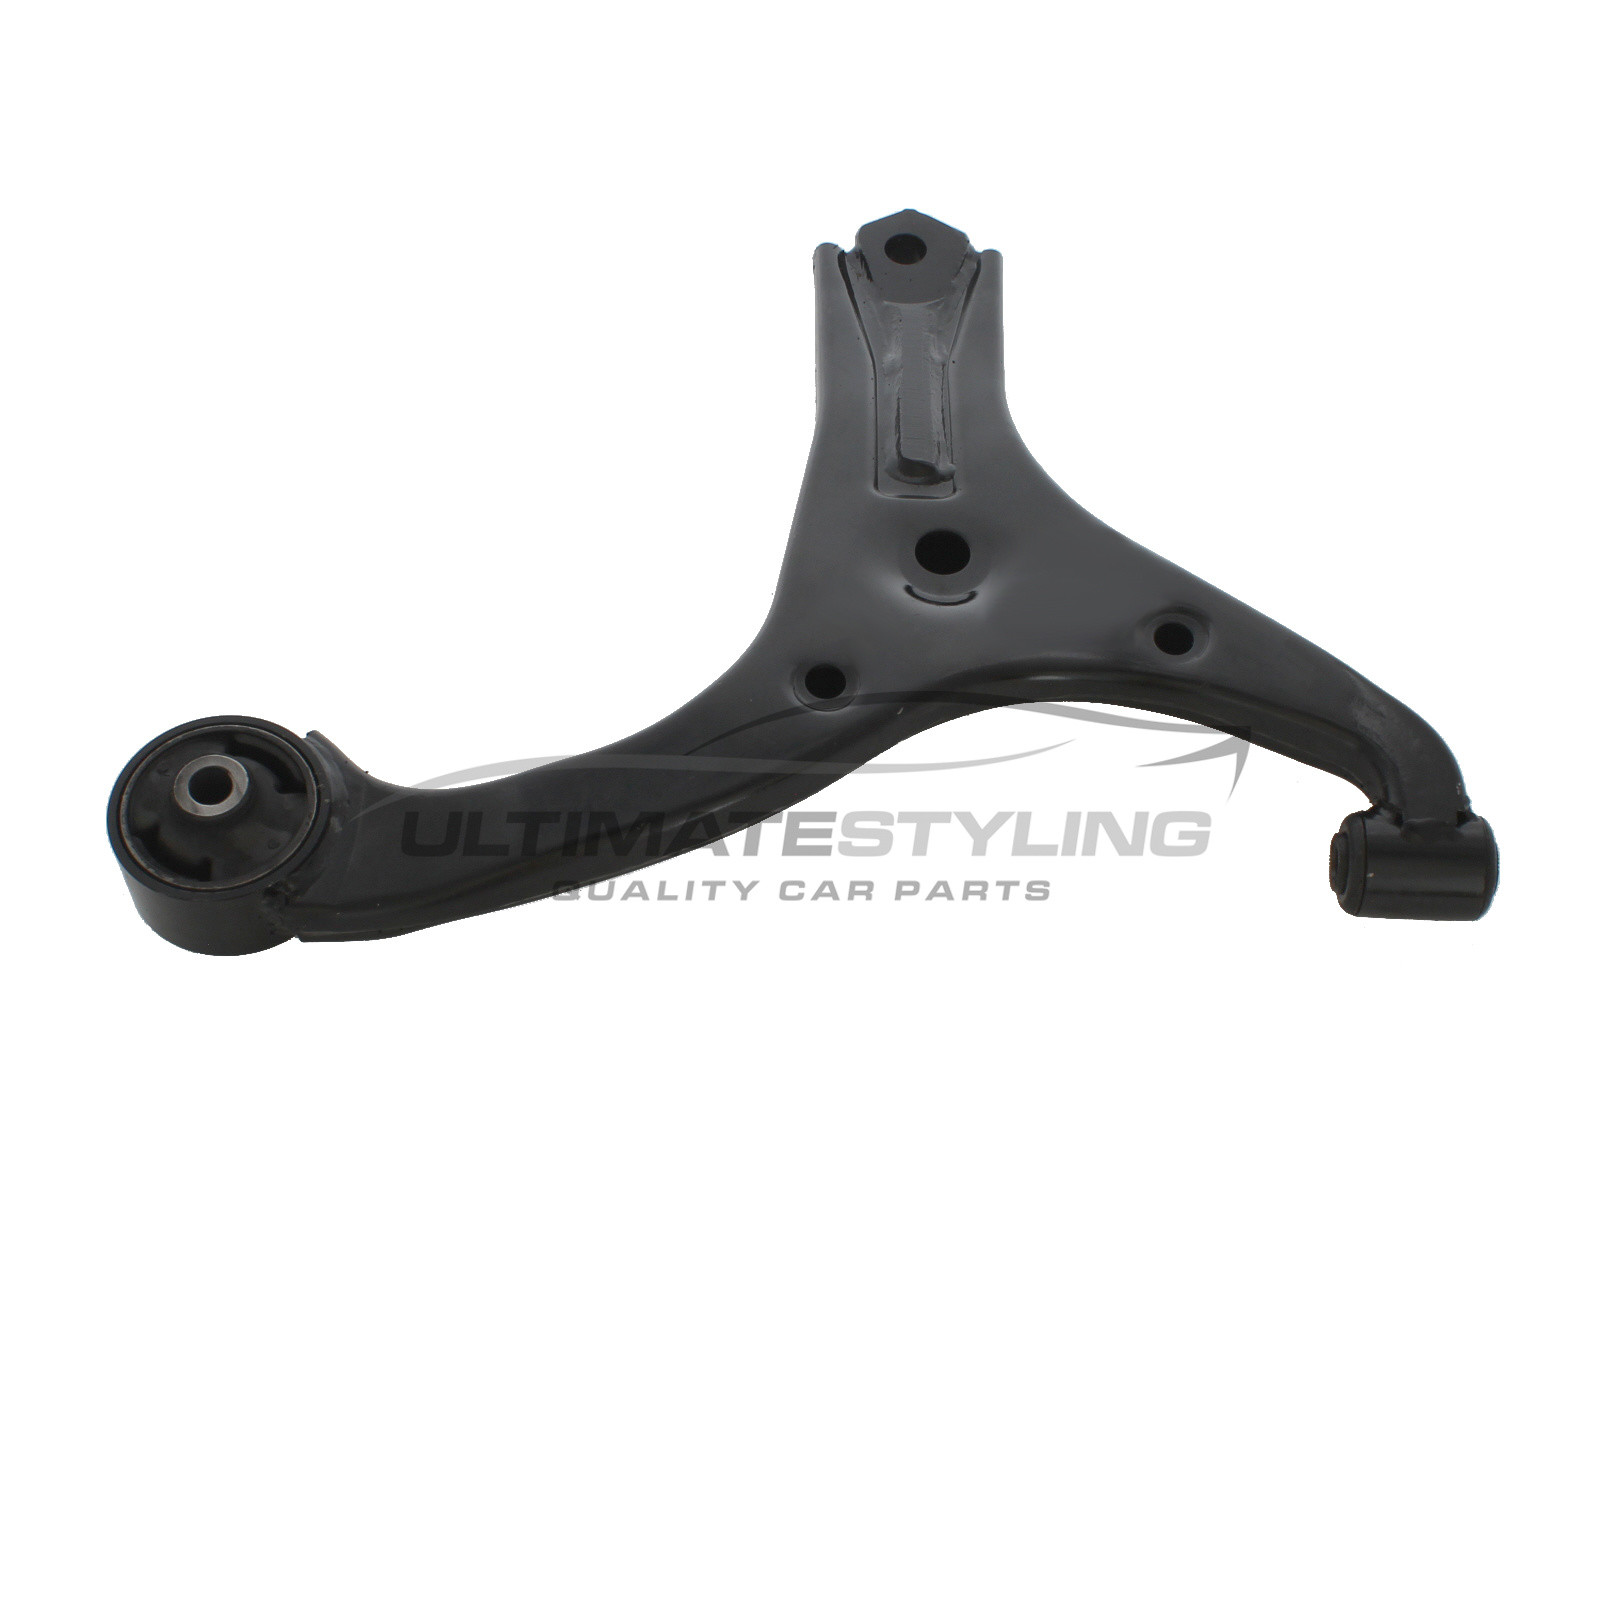 Hyundai Accent 2006-2010, Kia Rio 2005-2011 Front Lower Suspension Arm (Steel) Excluding Ball Joint and Rear Bush Driver Side (RH)